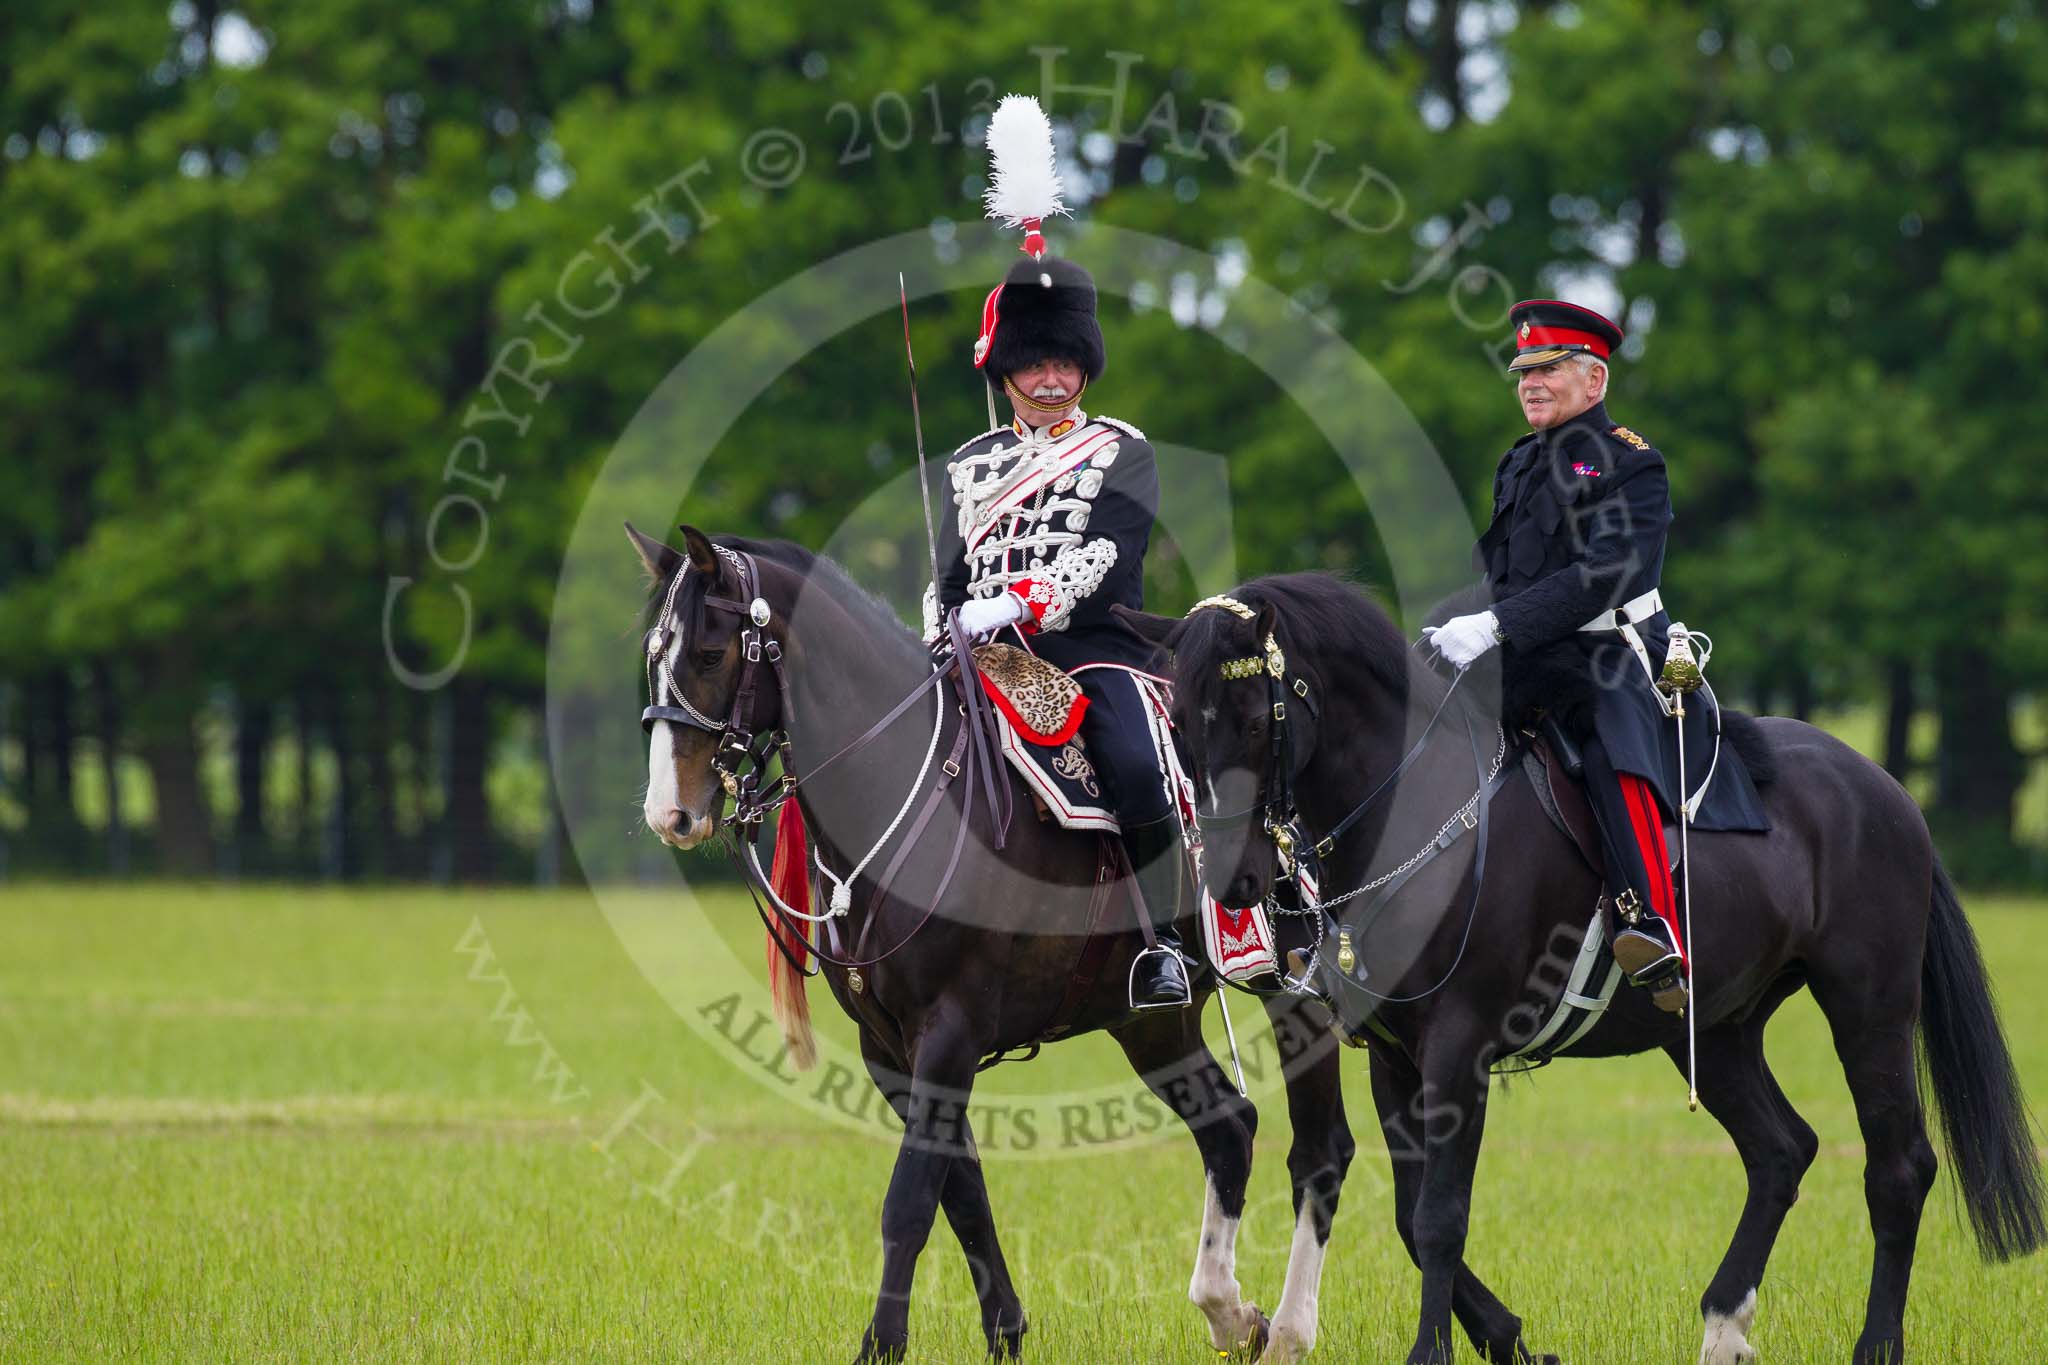 The Light Cavalry HAC Annual Review and Inspection 2013.
Windsor Great Park Review Ground,
Windsor,
Berkshire,
United Kingdom,
on 09 June 2013 at 13:27, image #362